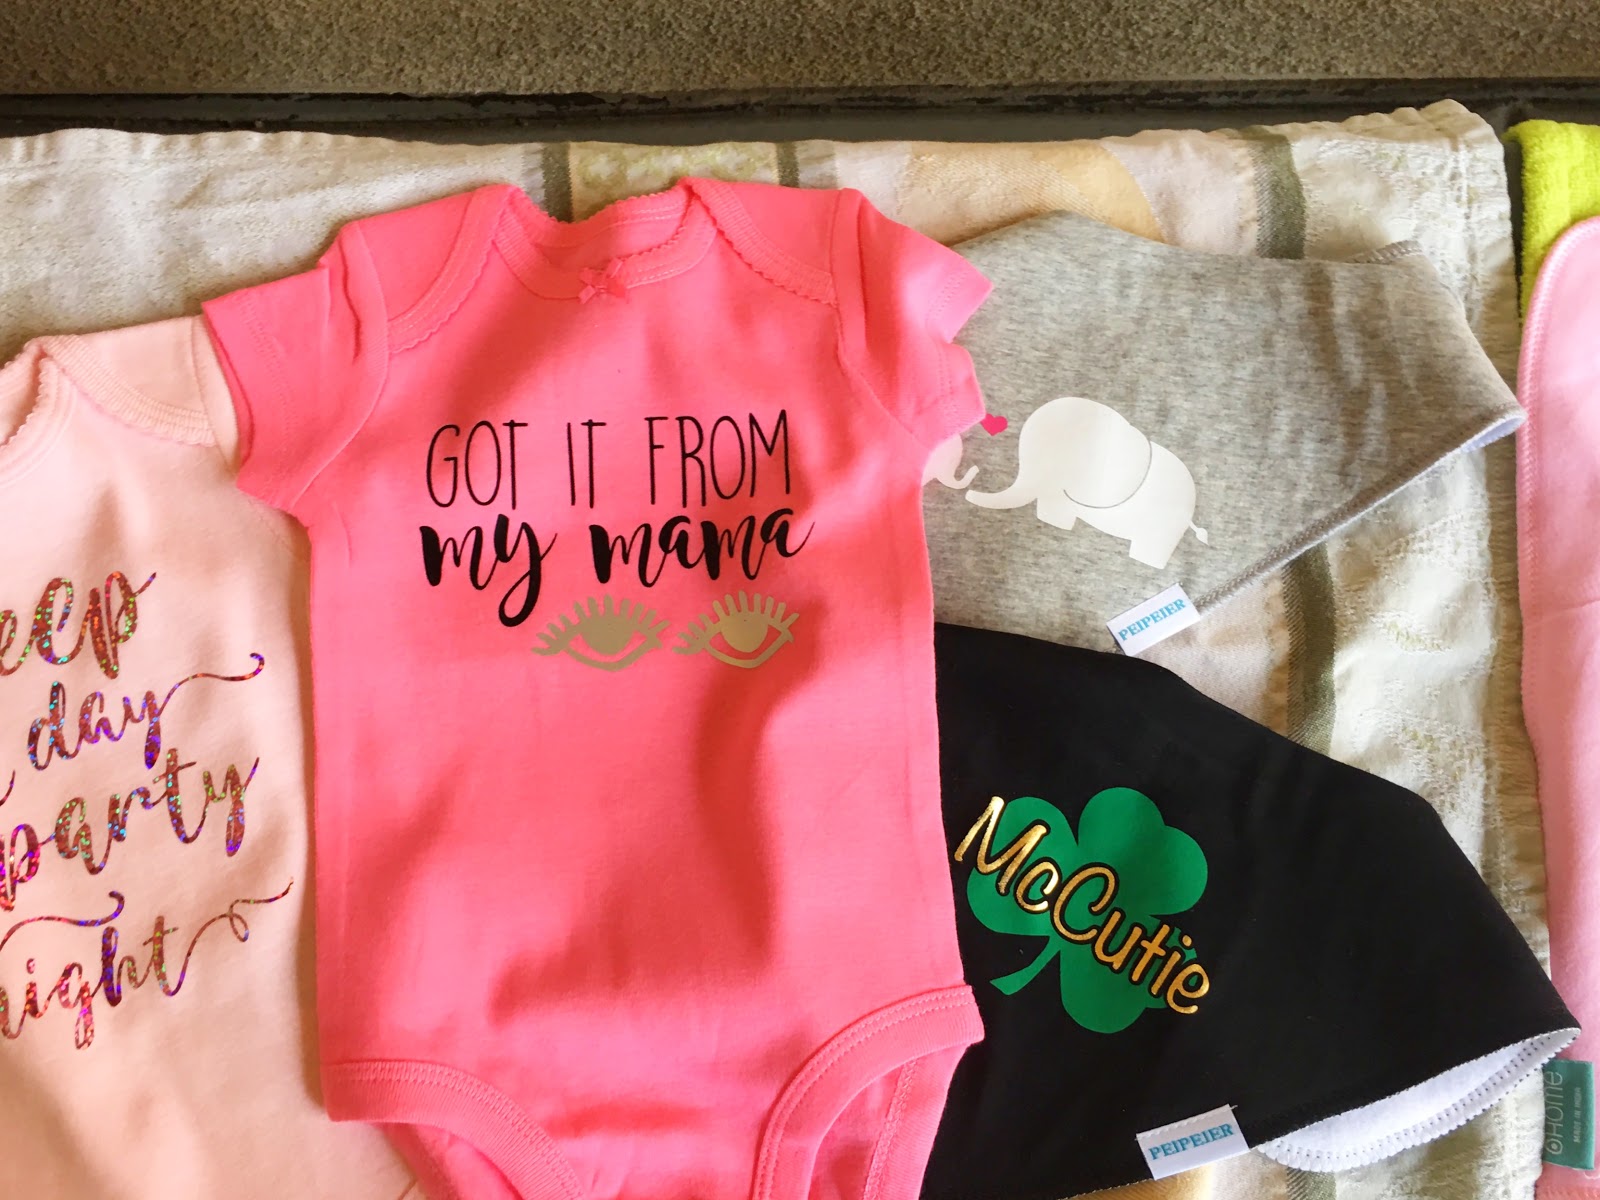 Baby Shower Ideas: Four Ways to Make a Onesie Decorating Station